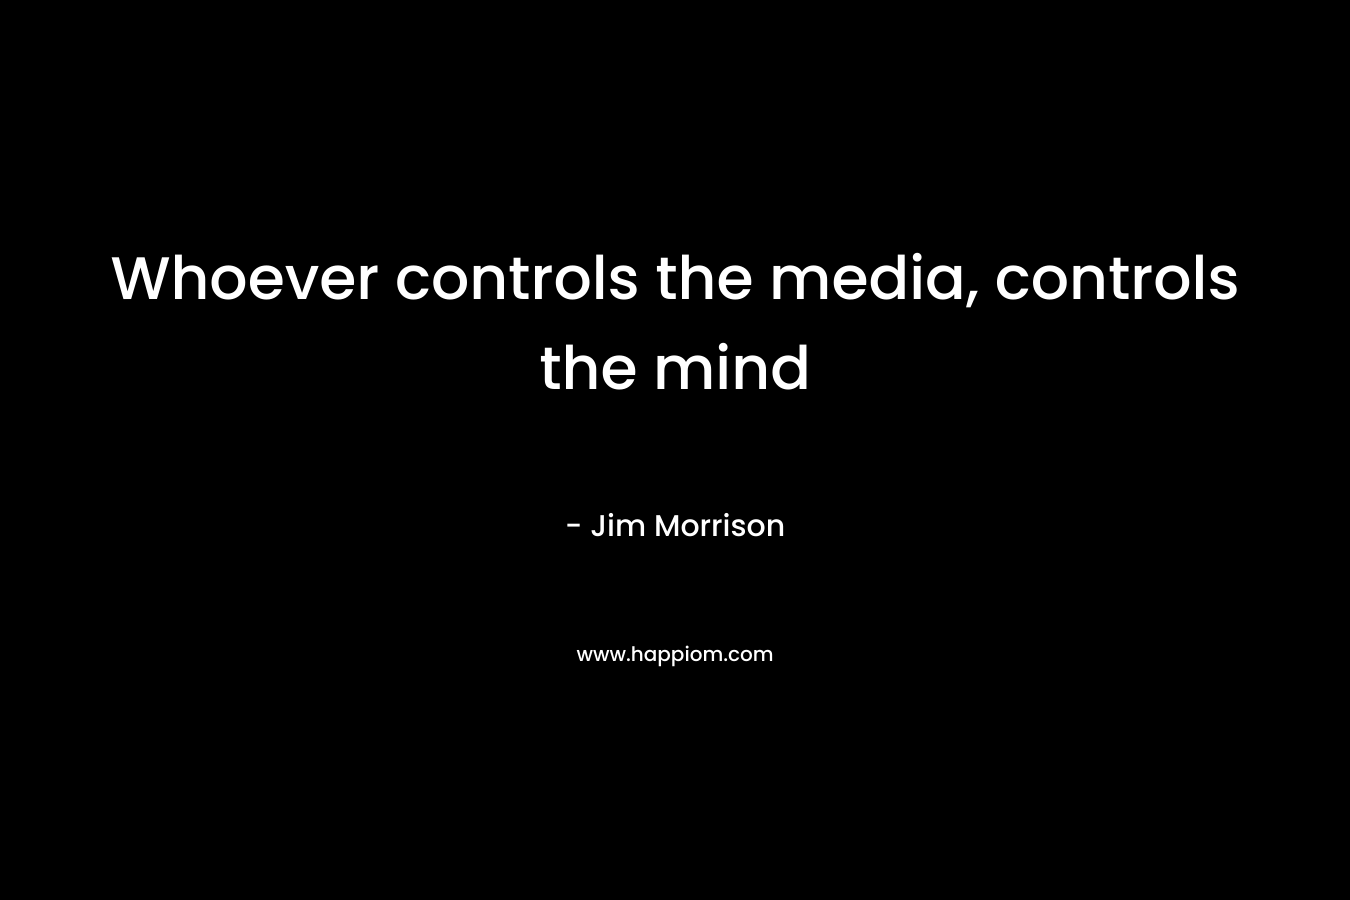 Whoever controls the media, controls the mind